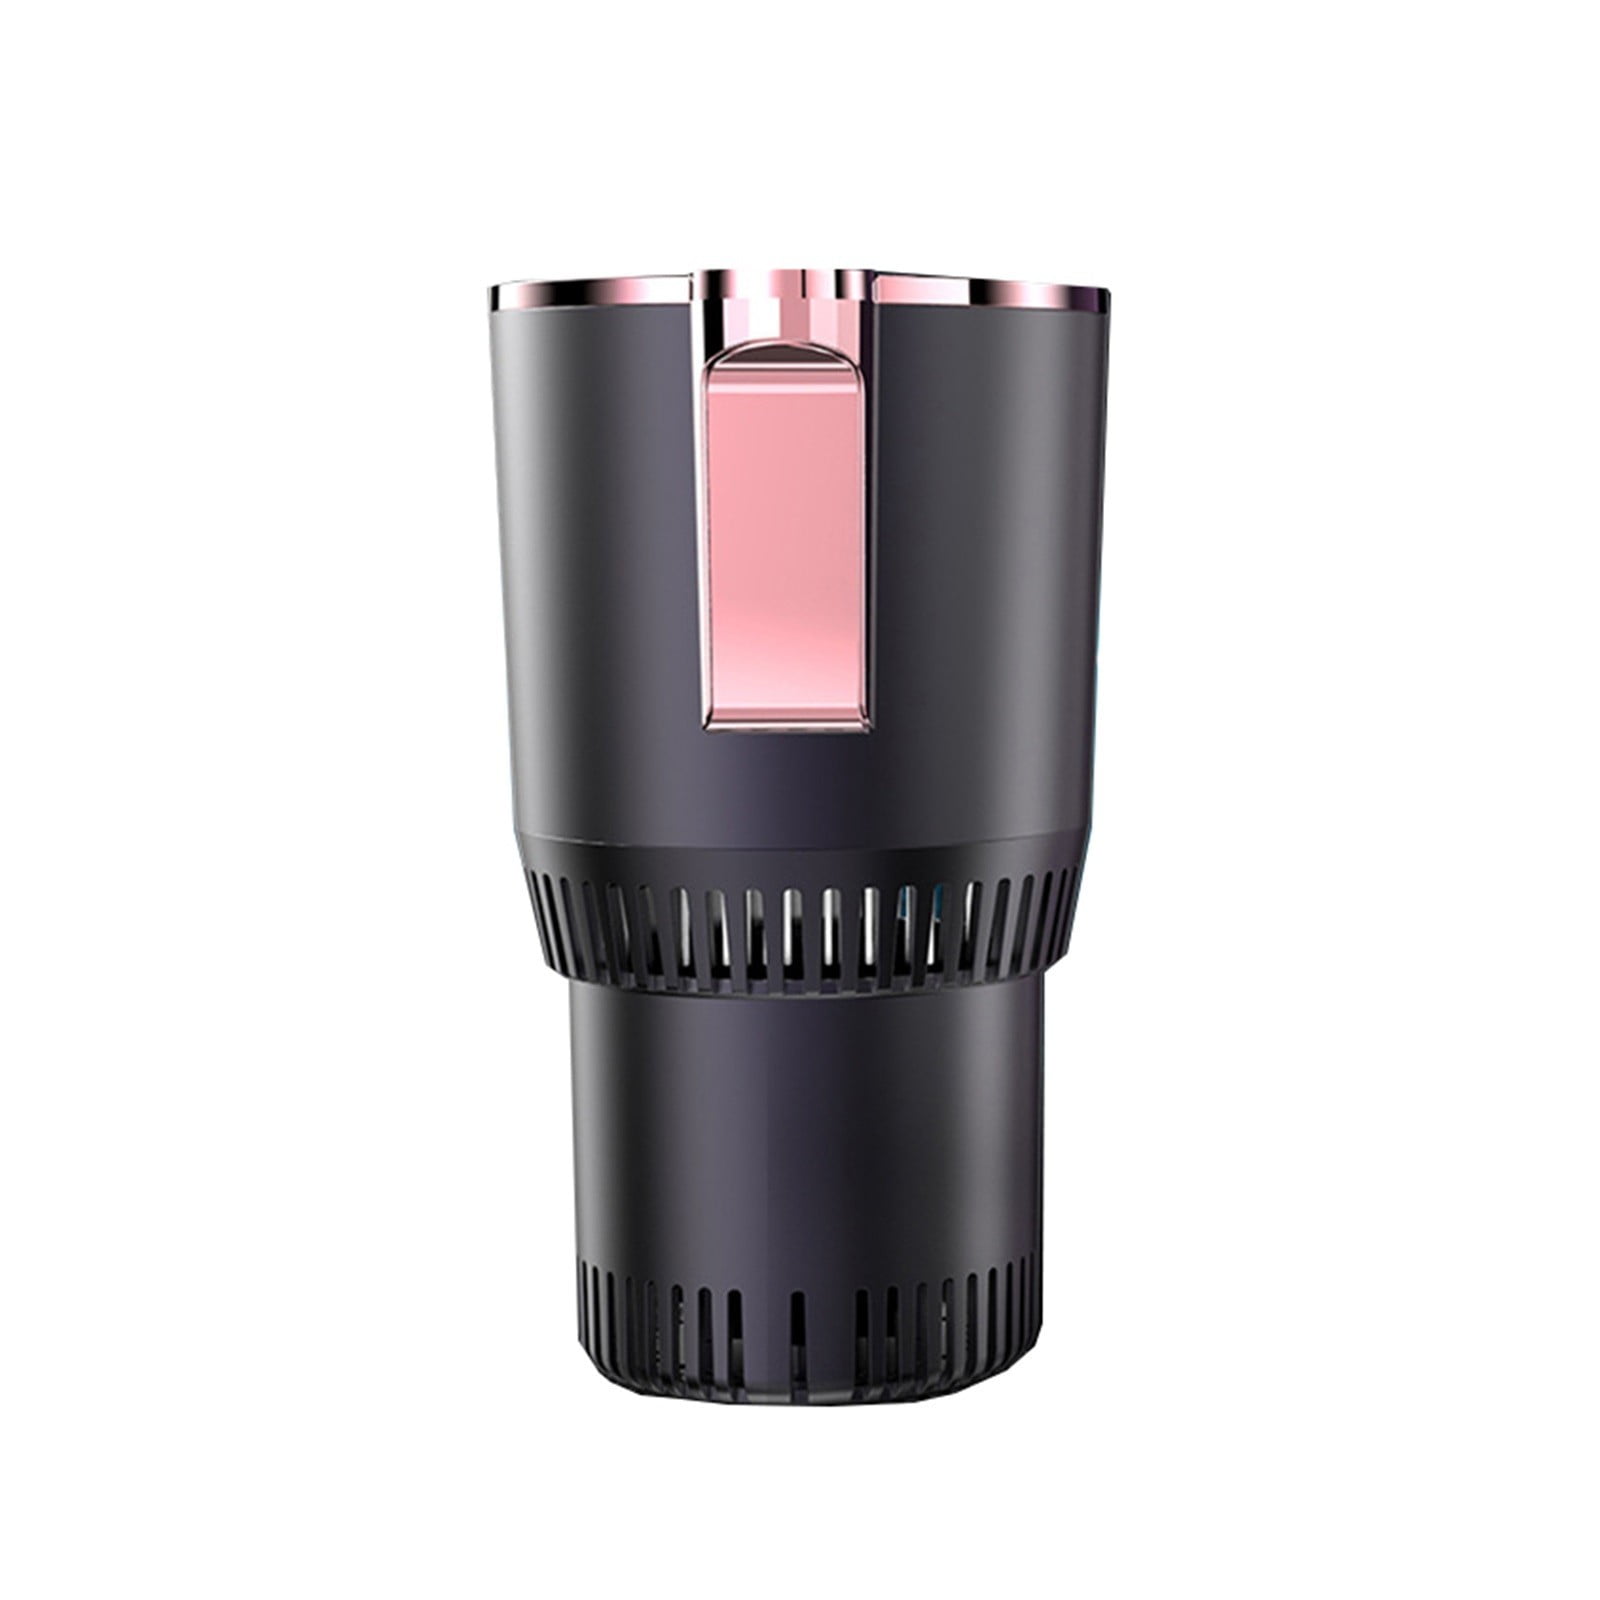 Dioche Car Cup Warmer Cooler , Portable Beverage Cooling & Heating